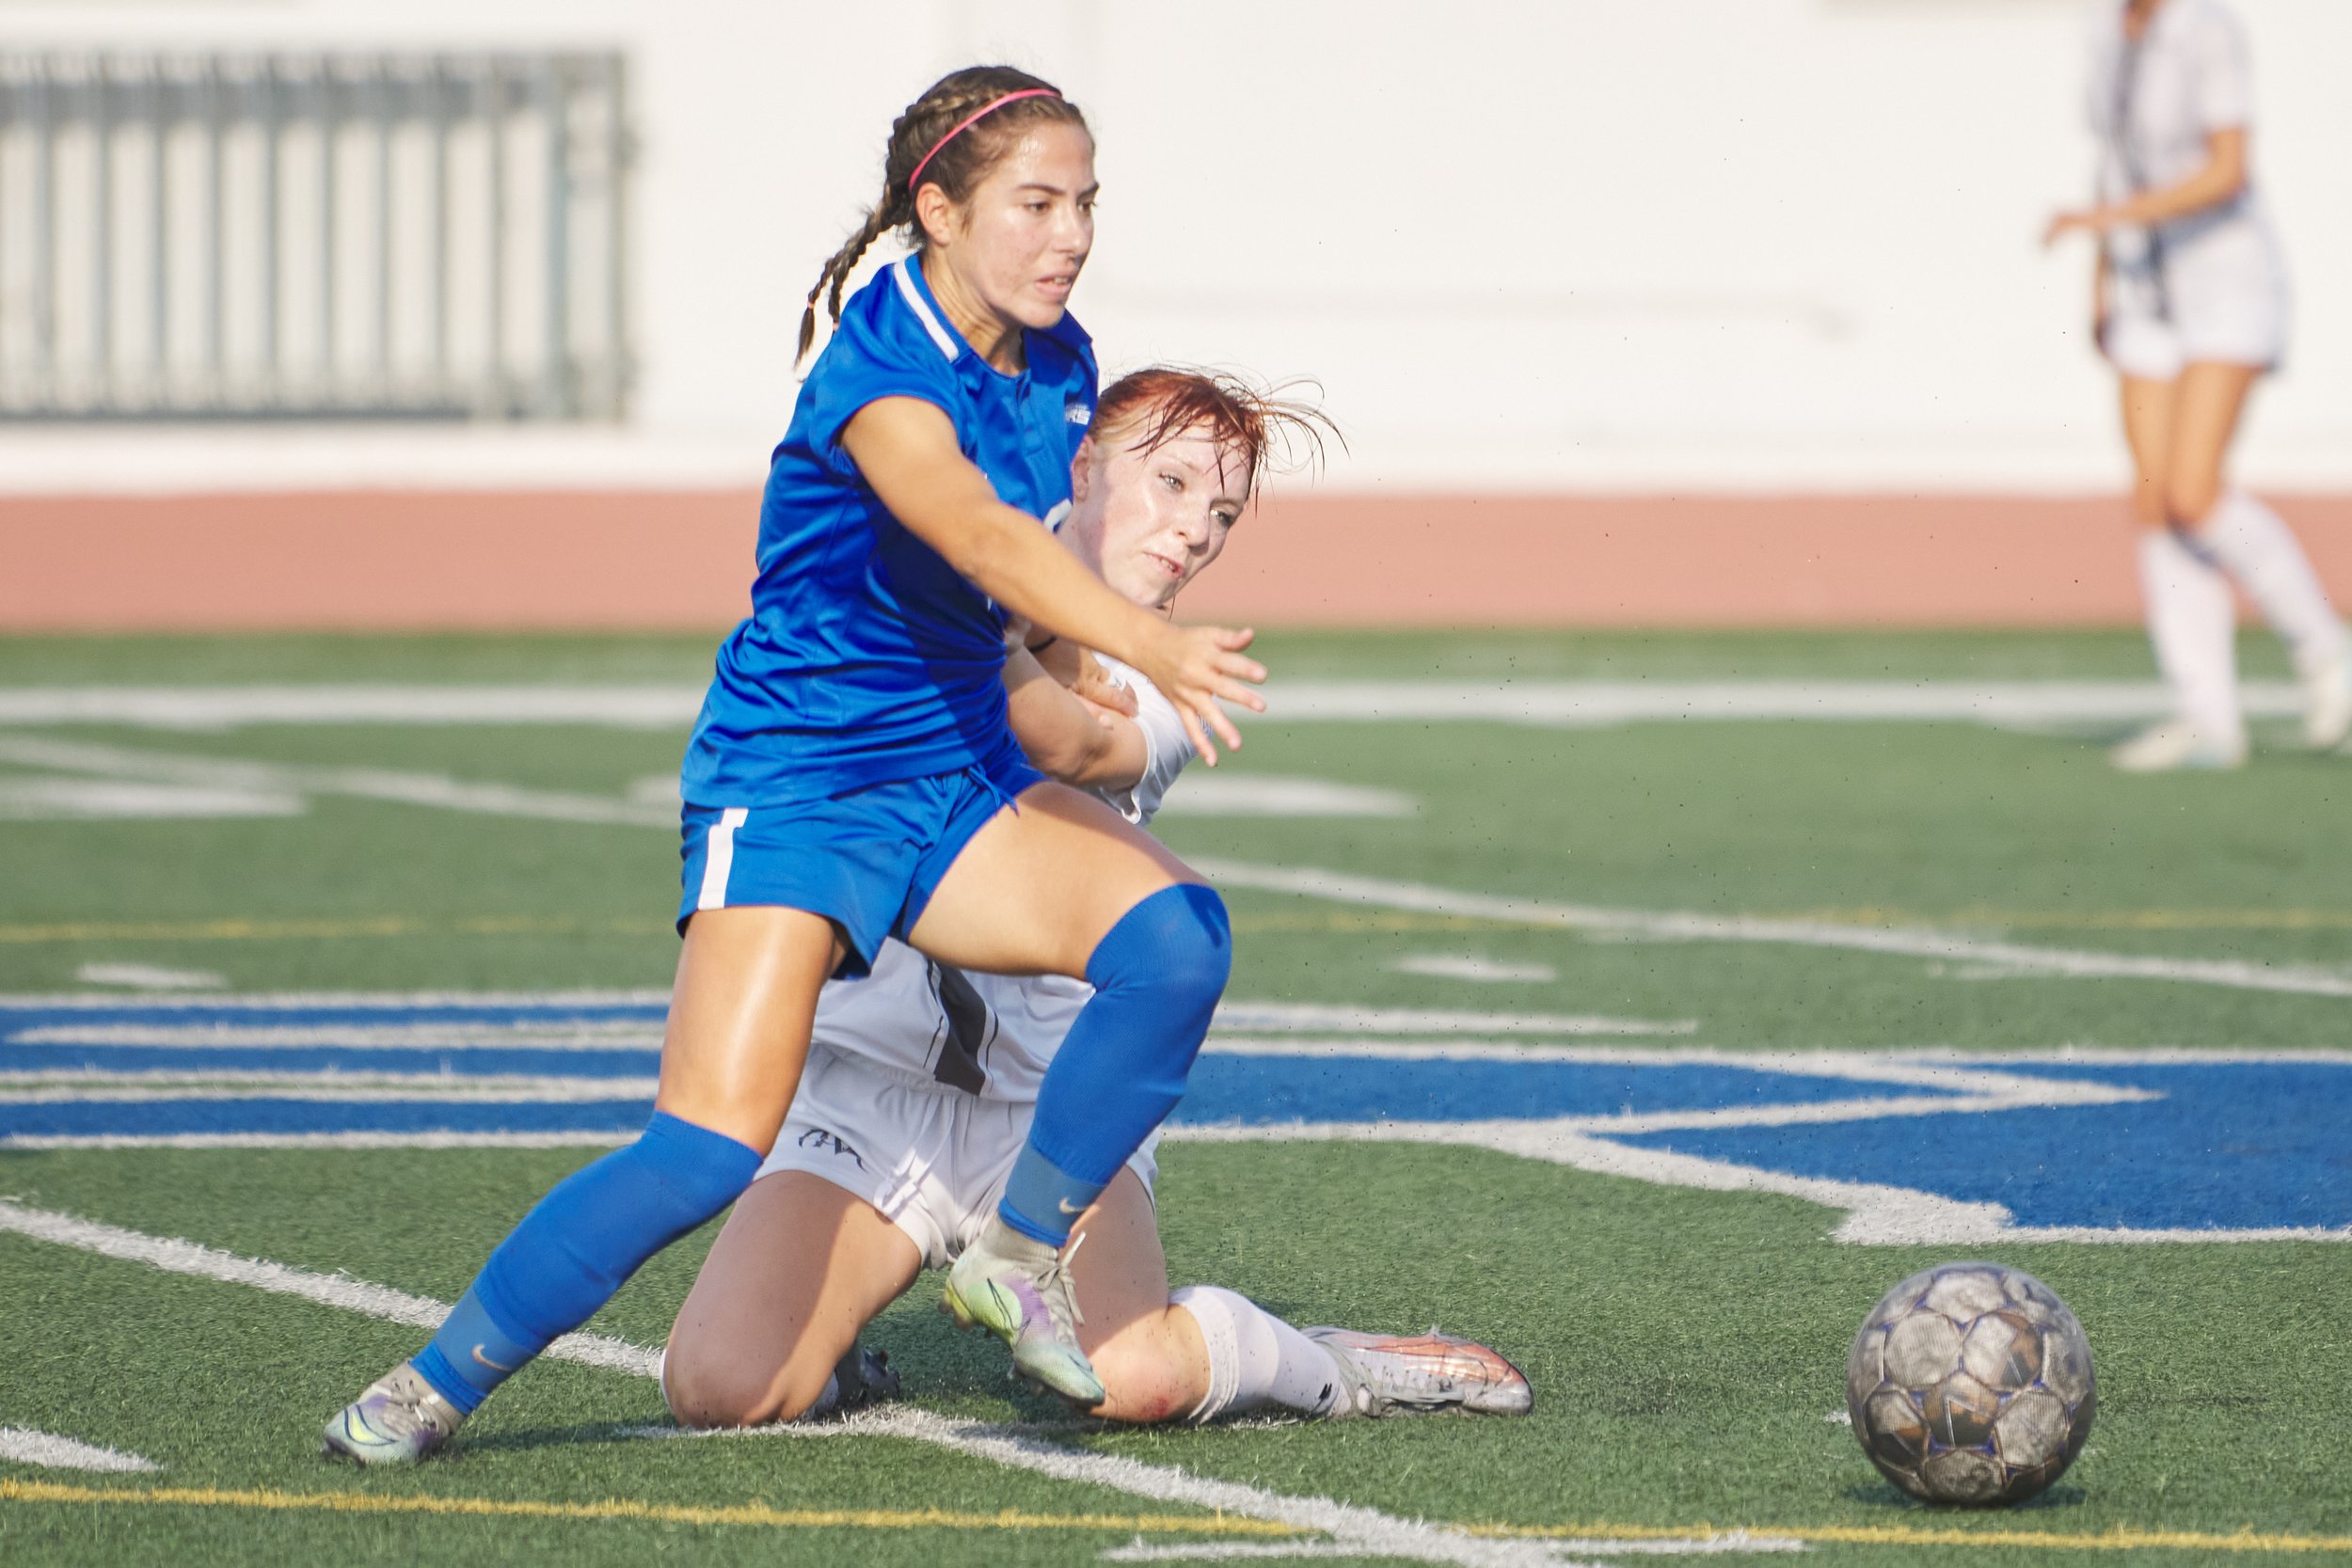  Antelope Valley College Marauders' Megan Salvesvold (right) fails to take the ball from Santa Monica College Corsairs' Sophie Doumitt (left) during the women's soccer match on Tuesday, Oct. 11, 2022, at Corsair Field in Santa Monica, Calif. The Cors